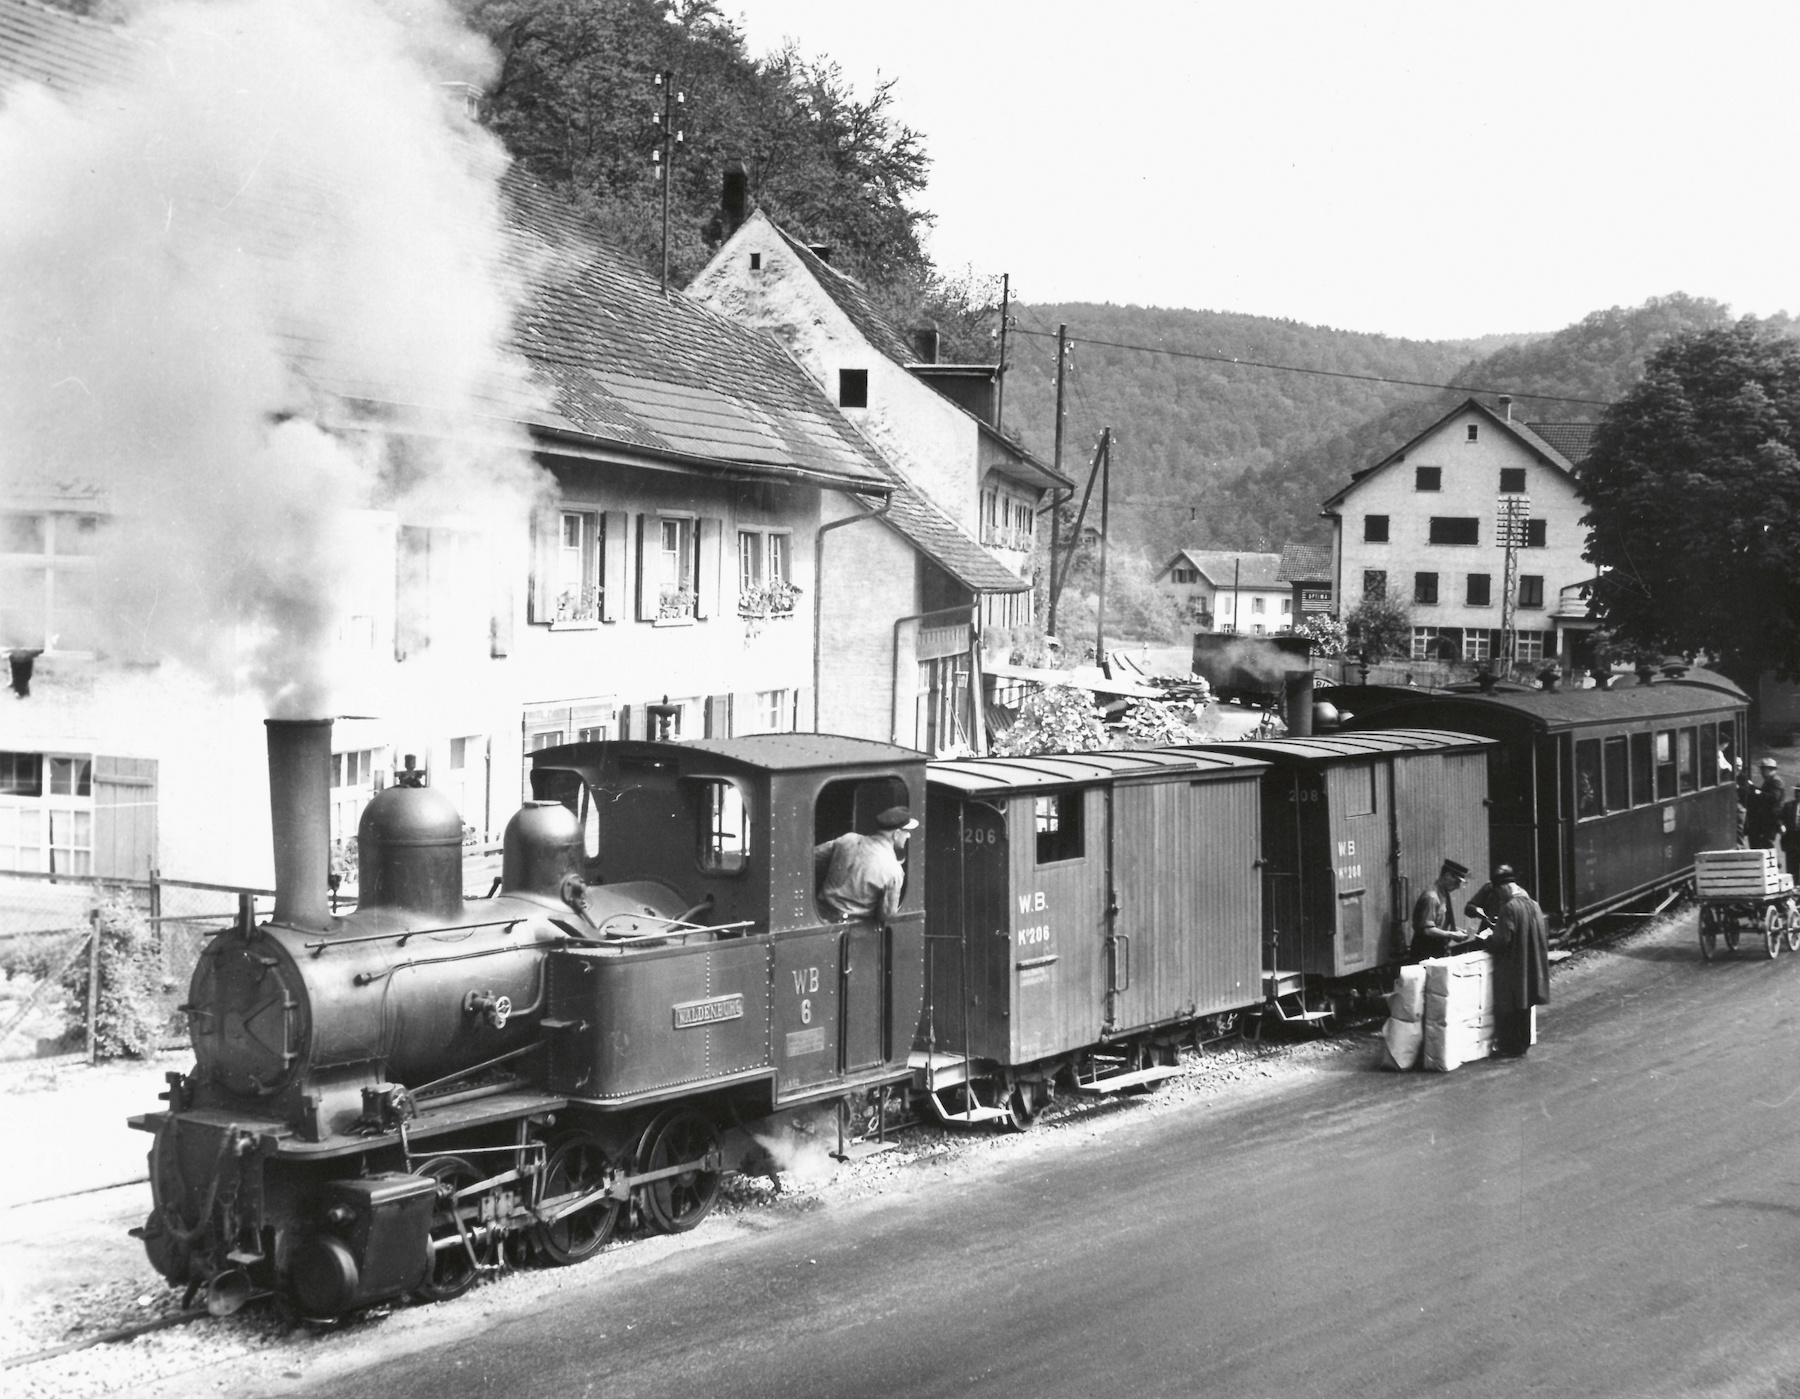 A steam locomotive brings goods and passengers into the Waldenburg Valley